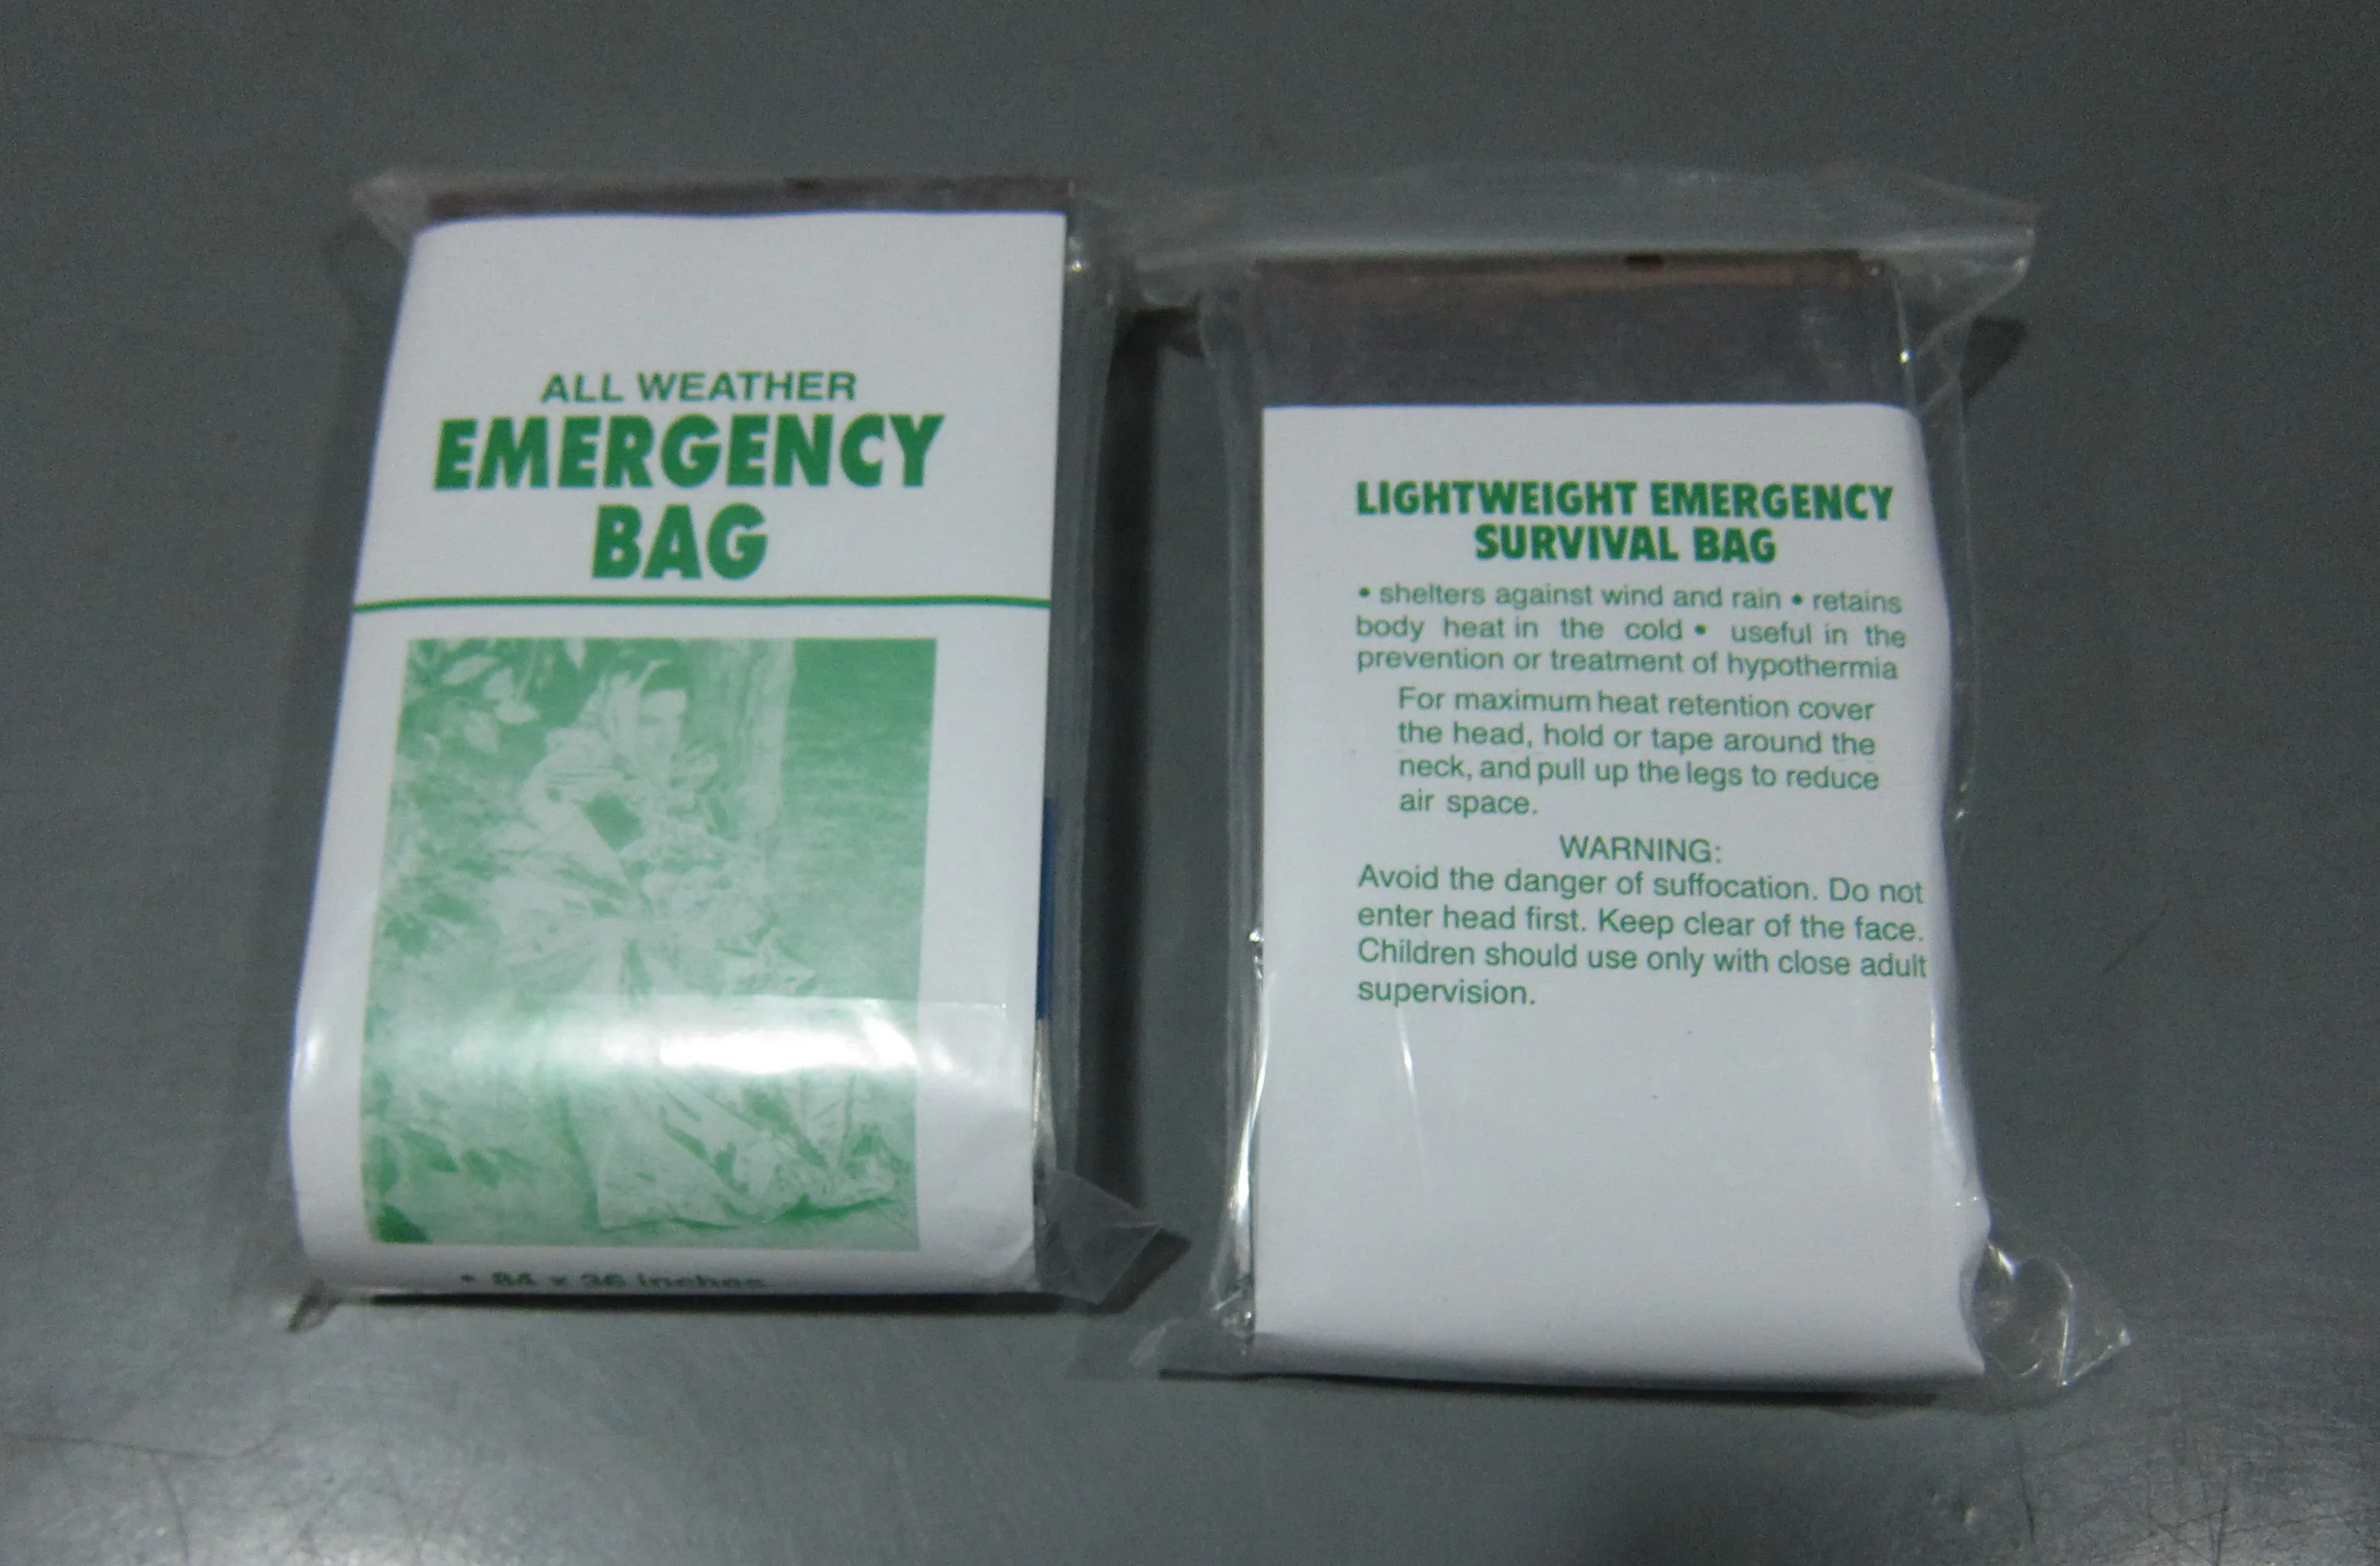 All weather Emergency Bag. All weather Emergency Bag 84x36 inches.